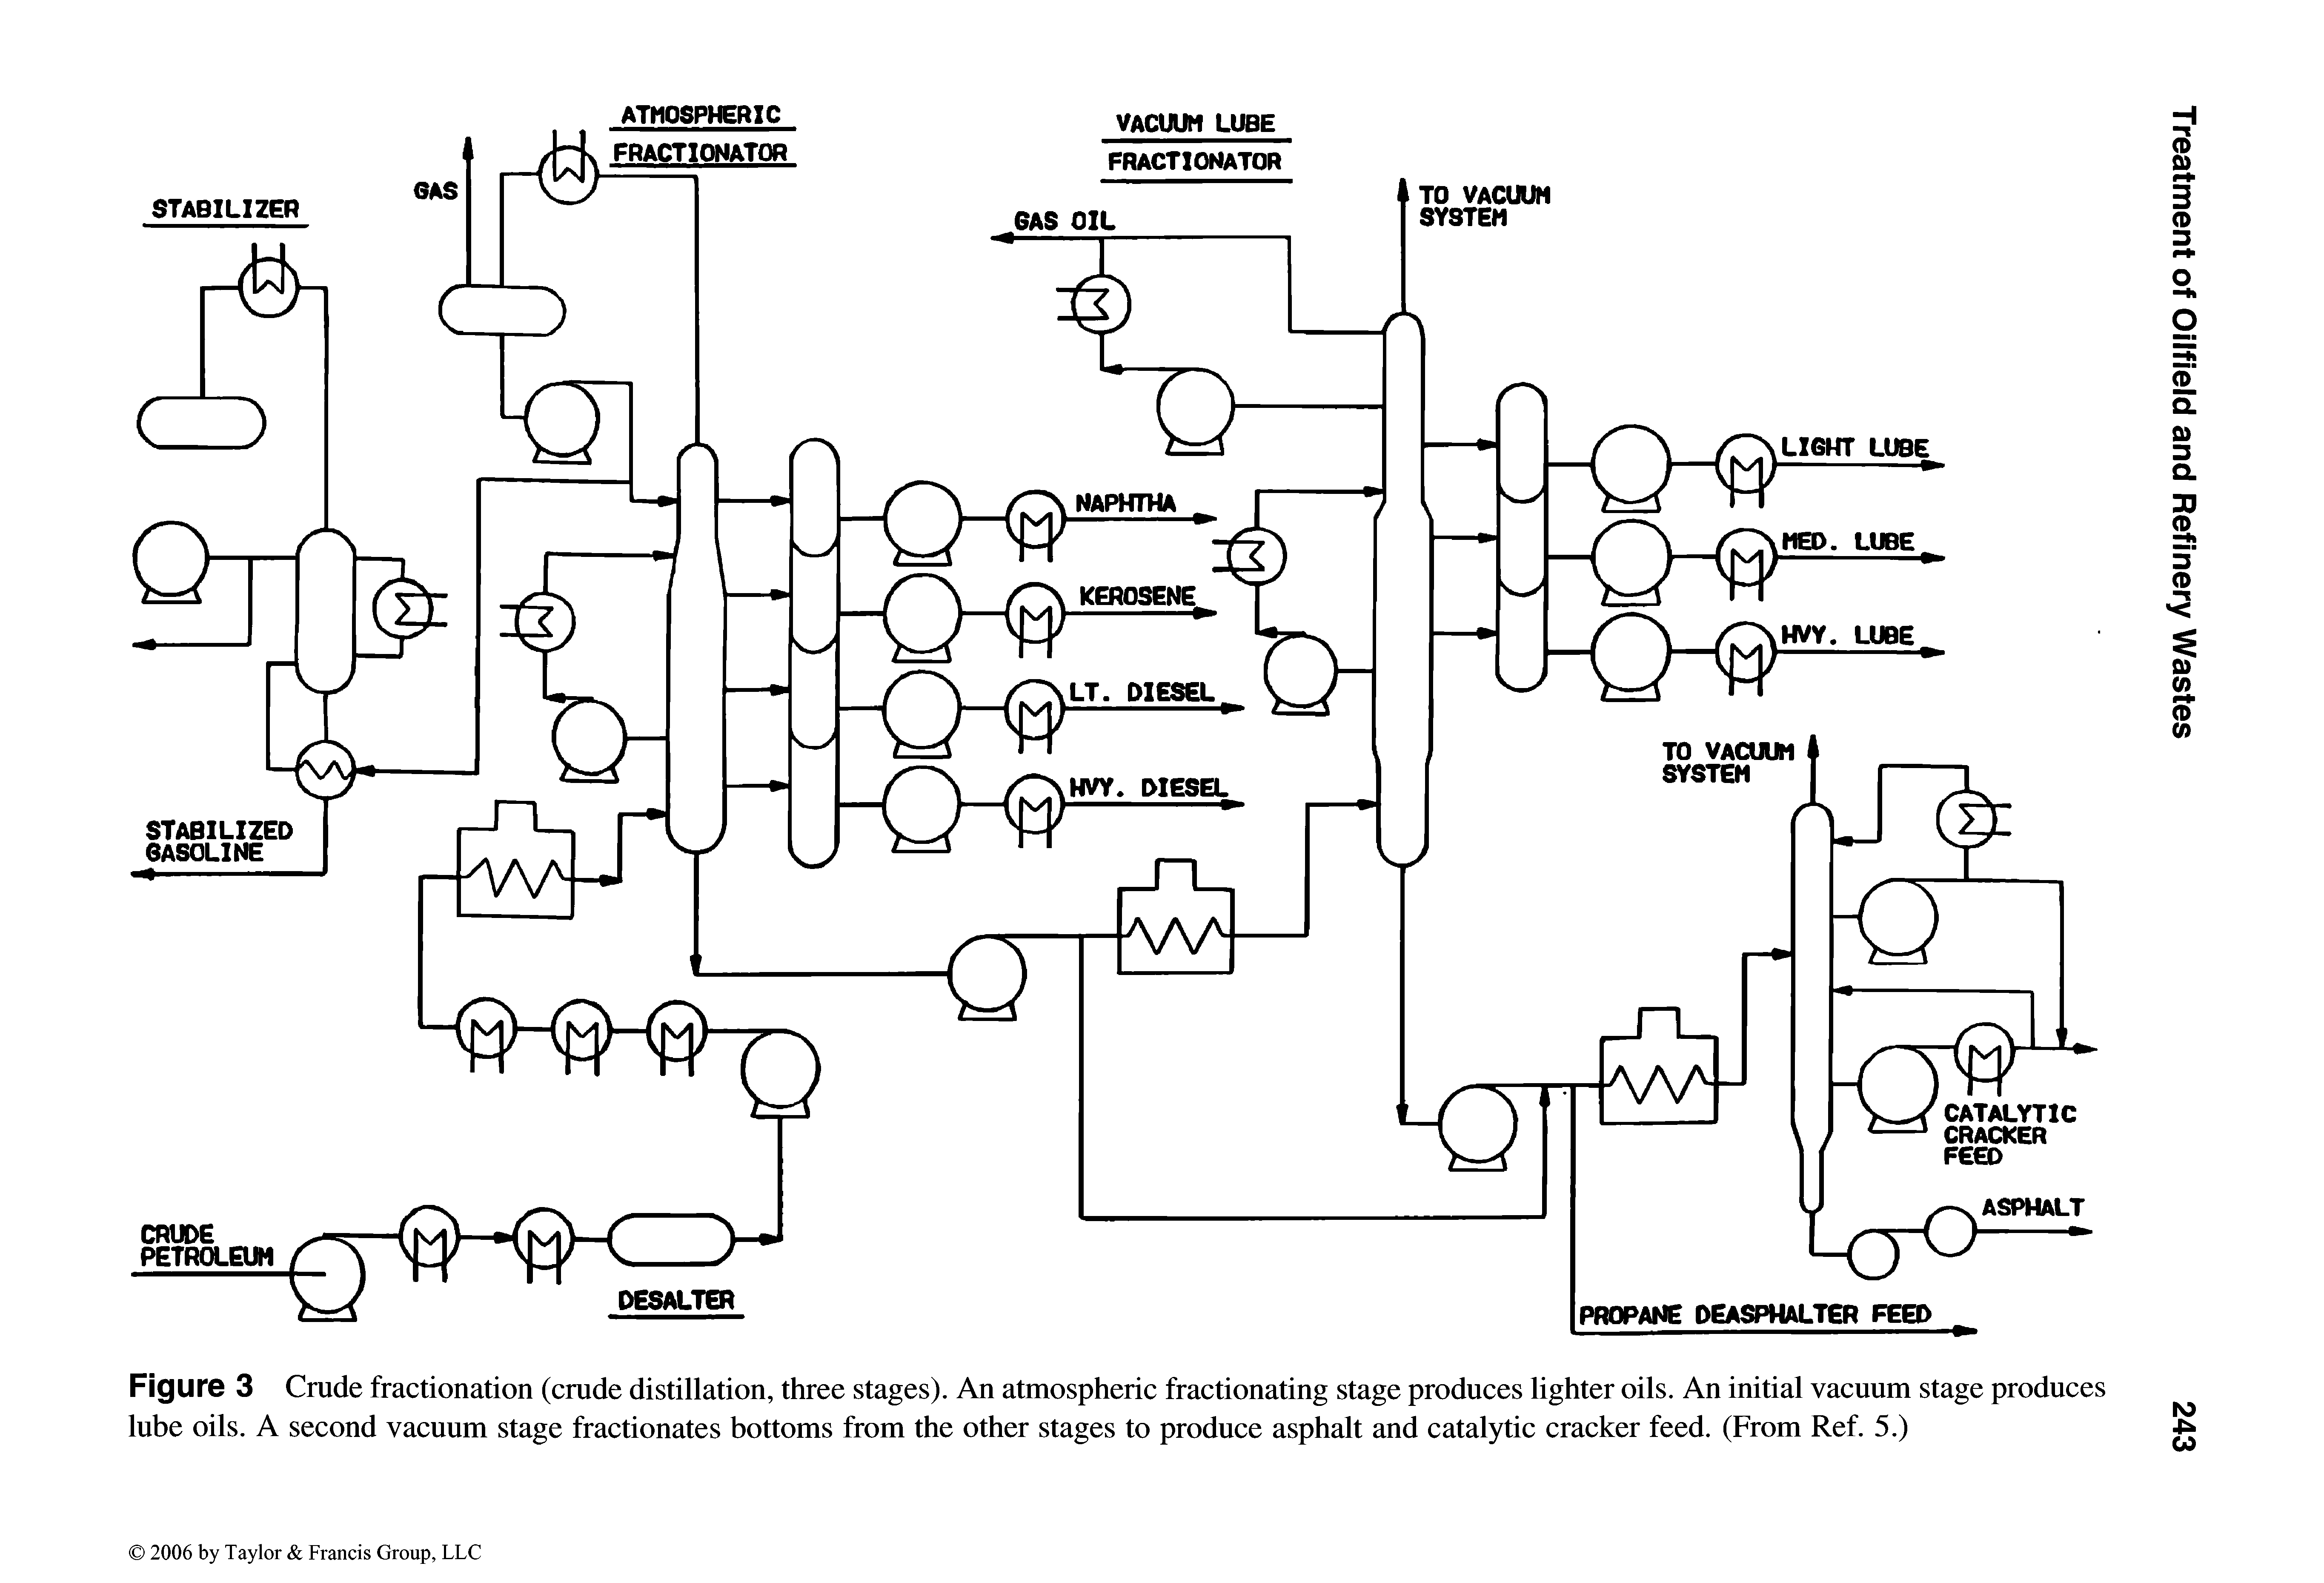 Figure 3 Crude fractionation (crude distillation, three stages). An atmospheric fractionating stage produces lighter oils. An initial vacuum stage produces lube oils. A second vacuum stage fractionates bottoms from the other stages to produce asphalt and catalytic cracker feed. (From Ref. 5.)...